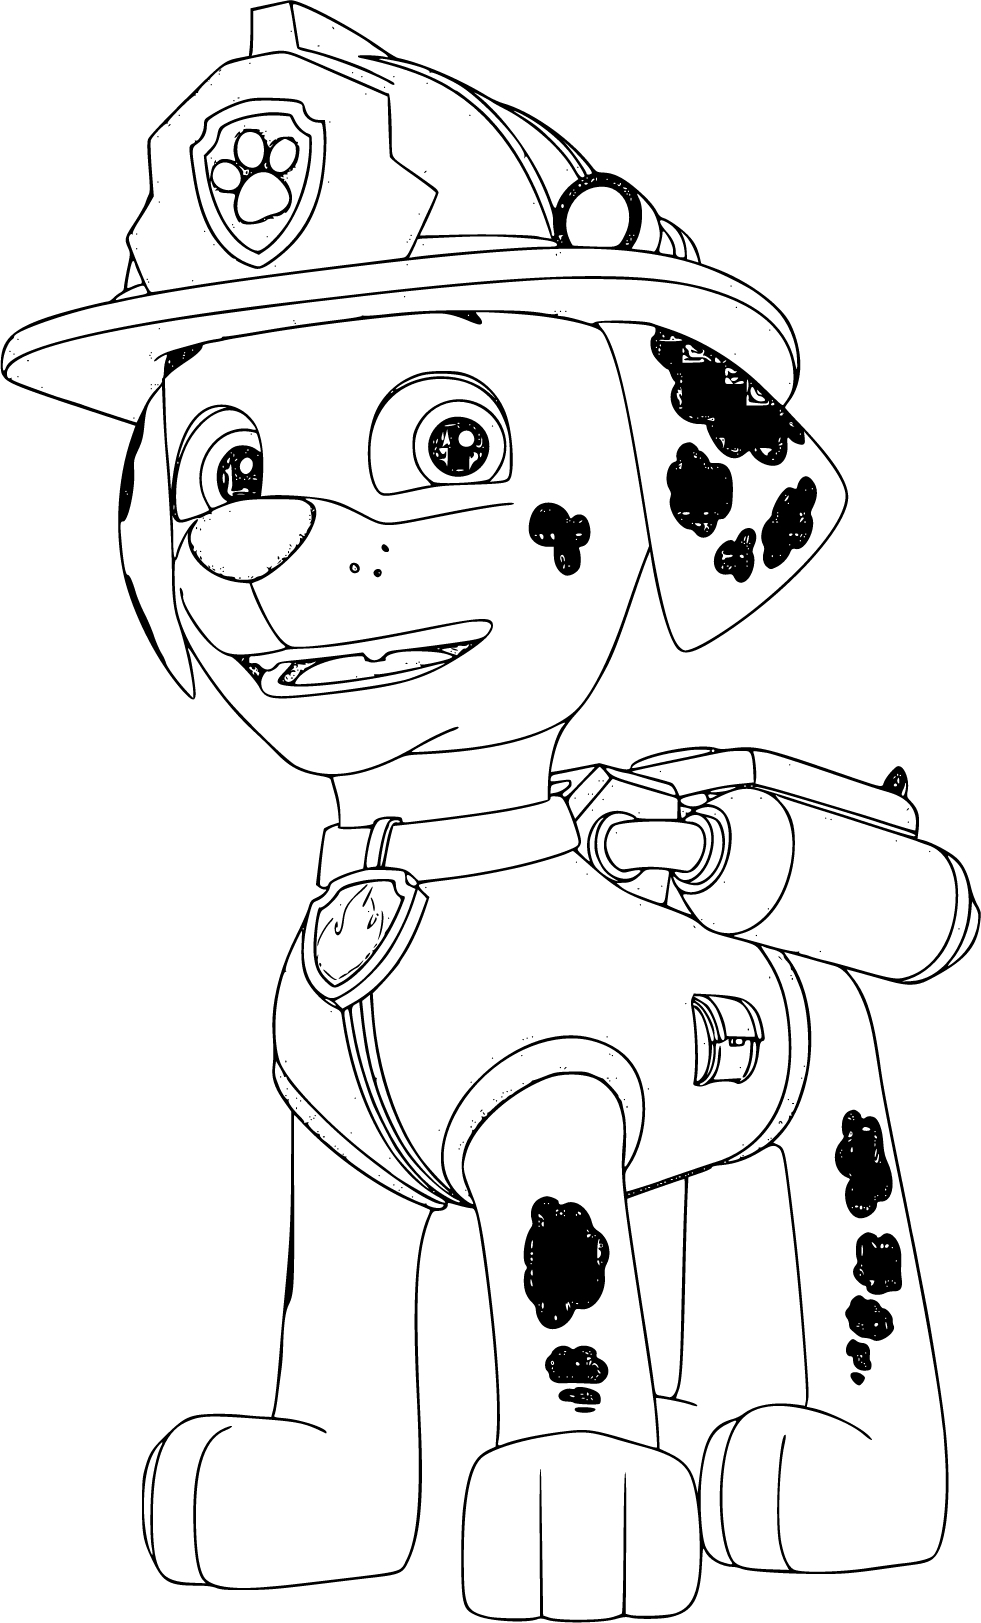 Paw Patrol Lovely Marshall Coloring Page - SheetalColor.com